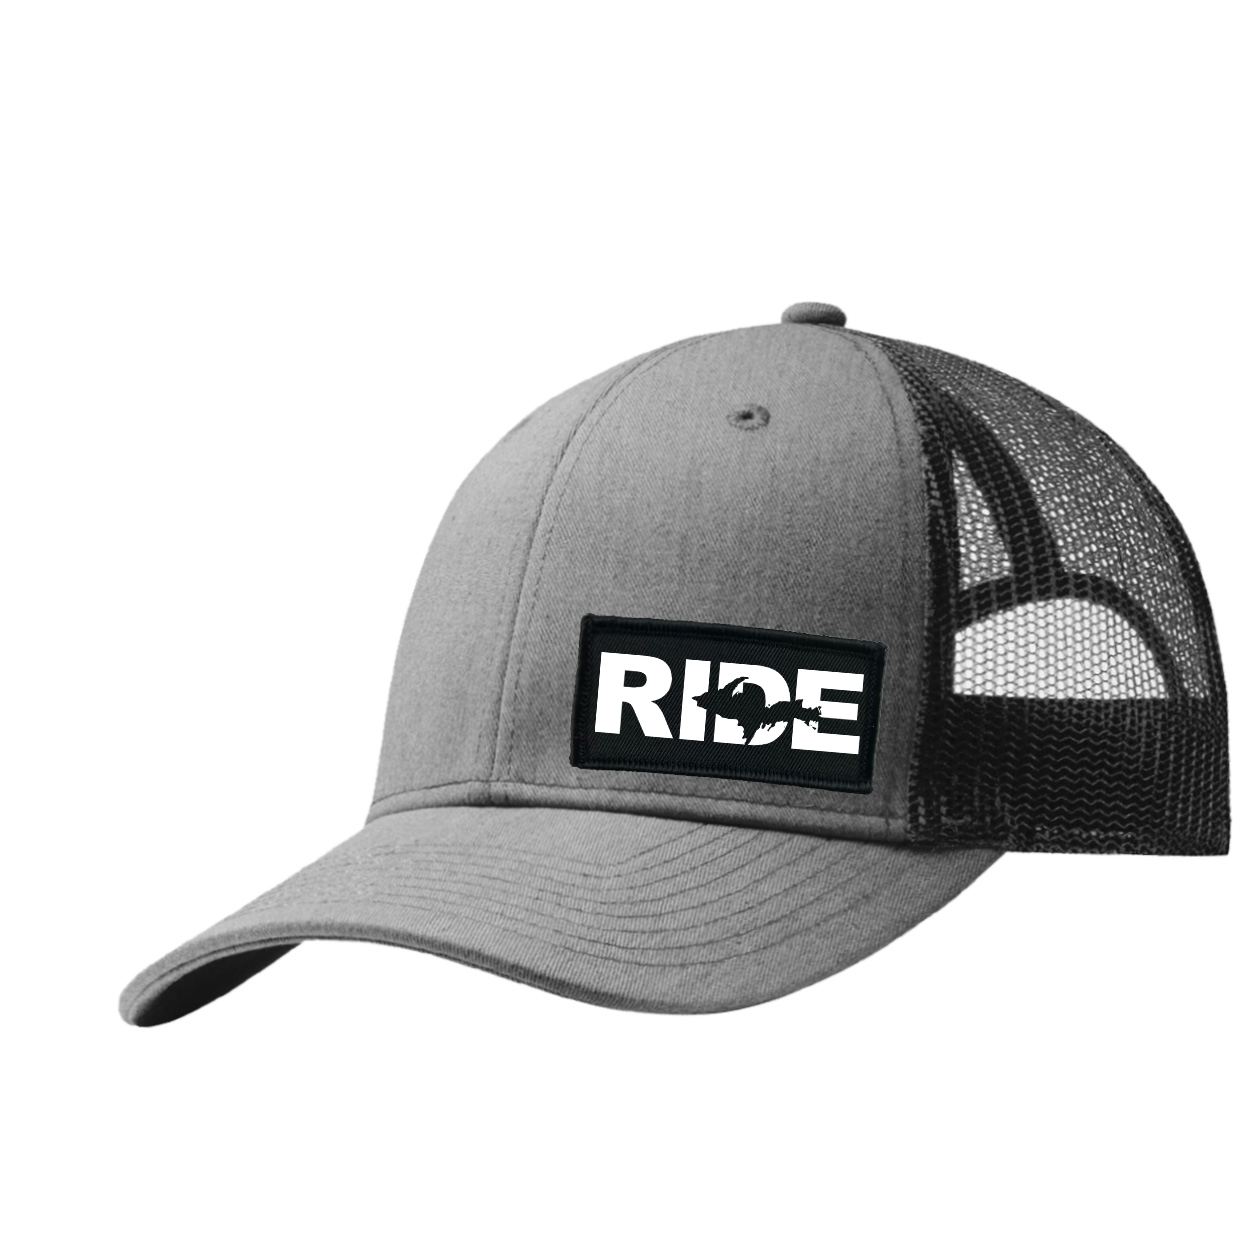 Ride Michigan UP Night Out Woven Patch Snapback Trucker Hat Heather Gray/Black (White Logo)